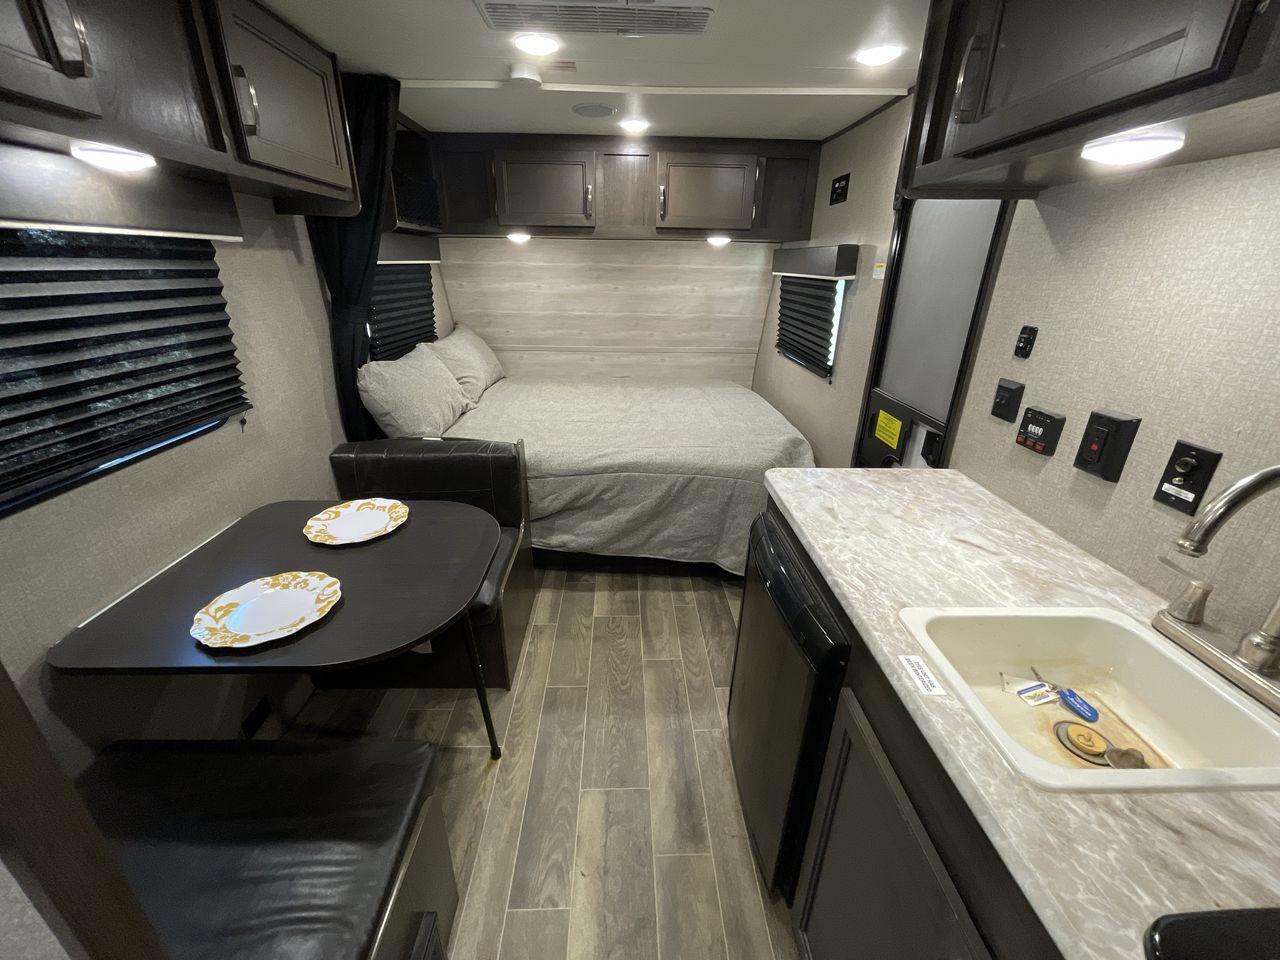 2021 JAYCO JAY FLIGHT SLX 174BH (1UJBJ0AJ1M1) , Length: 21.67 ft | Dry Weight: 3,075 lbs | GVWR: 3,950 lbs | Slides: 0 transmission, located at 4319 N Main St, Cleburne, TX, 76033, (817) 678-5133, 32.385960, -97.391212 - Take the 2021 Jayco Jay Flight SLX 174BH travel trailer out on your camping adventures. This lightweight and small RV is ideal for people looking for an affordable and cozy way to enjoy the great outdoors. The dimensions of this unit are 21.67 ft in length, 7.08 ft in width, and 9.17 ft in height. I - Photo #15